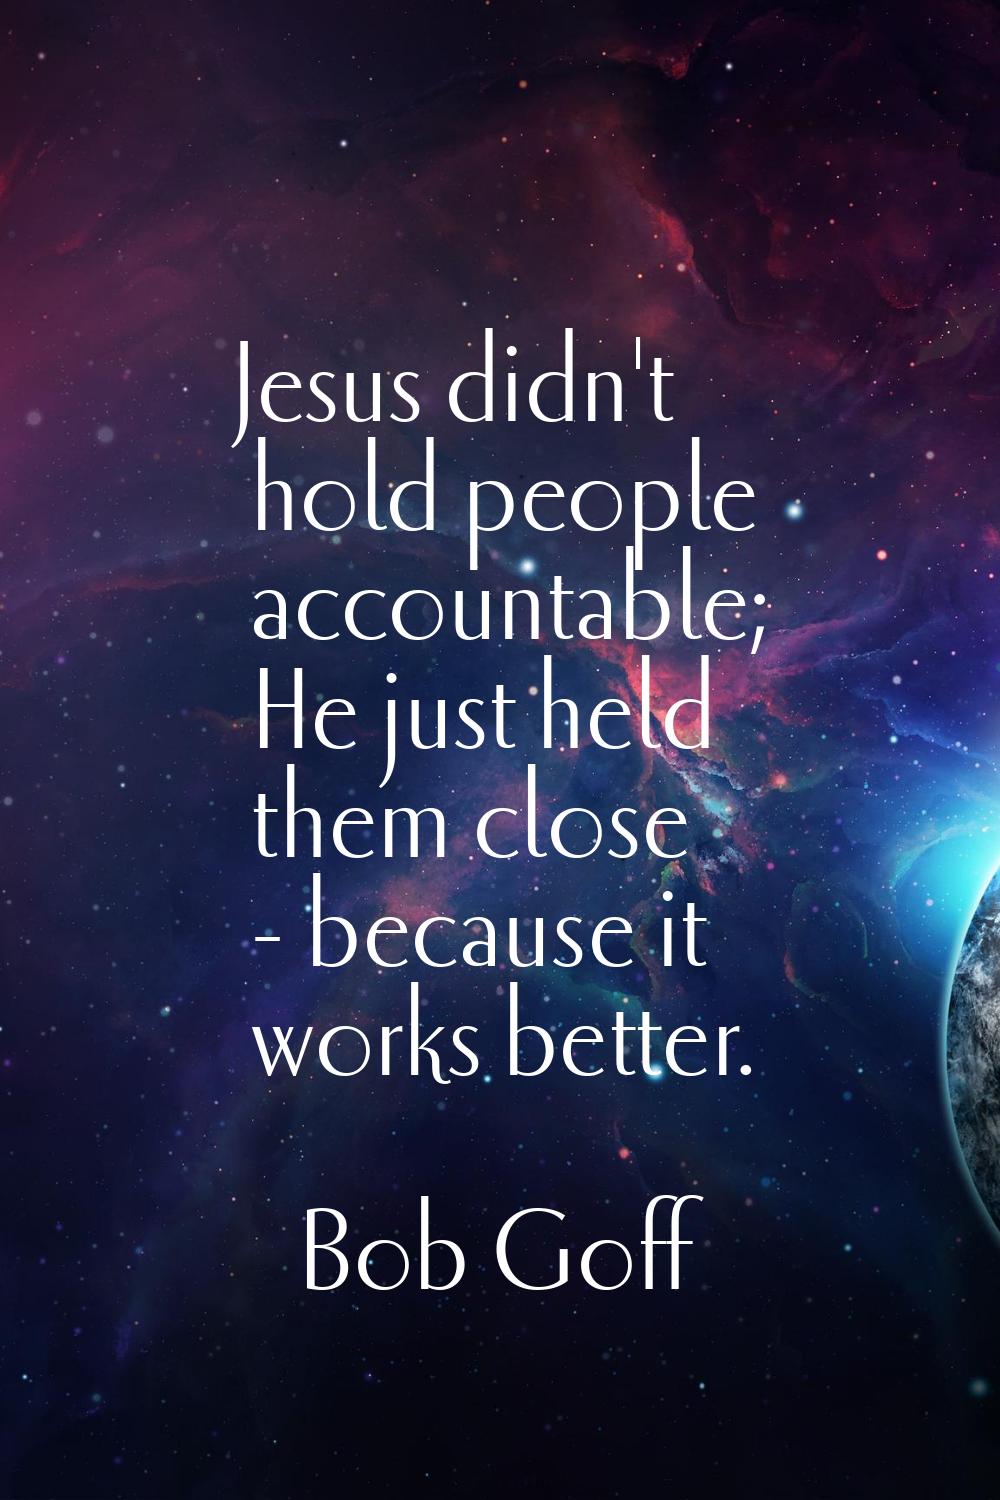 Jesus didn't hold people accountable; He just held them close - because it works better.